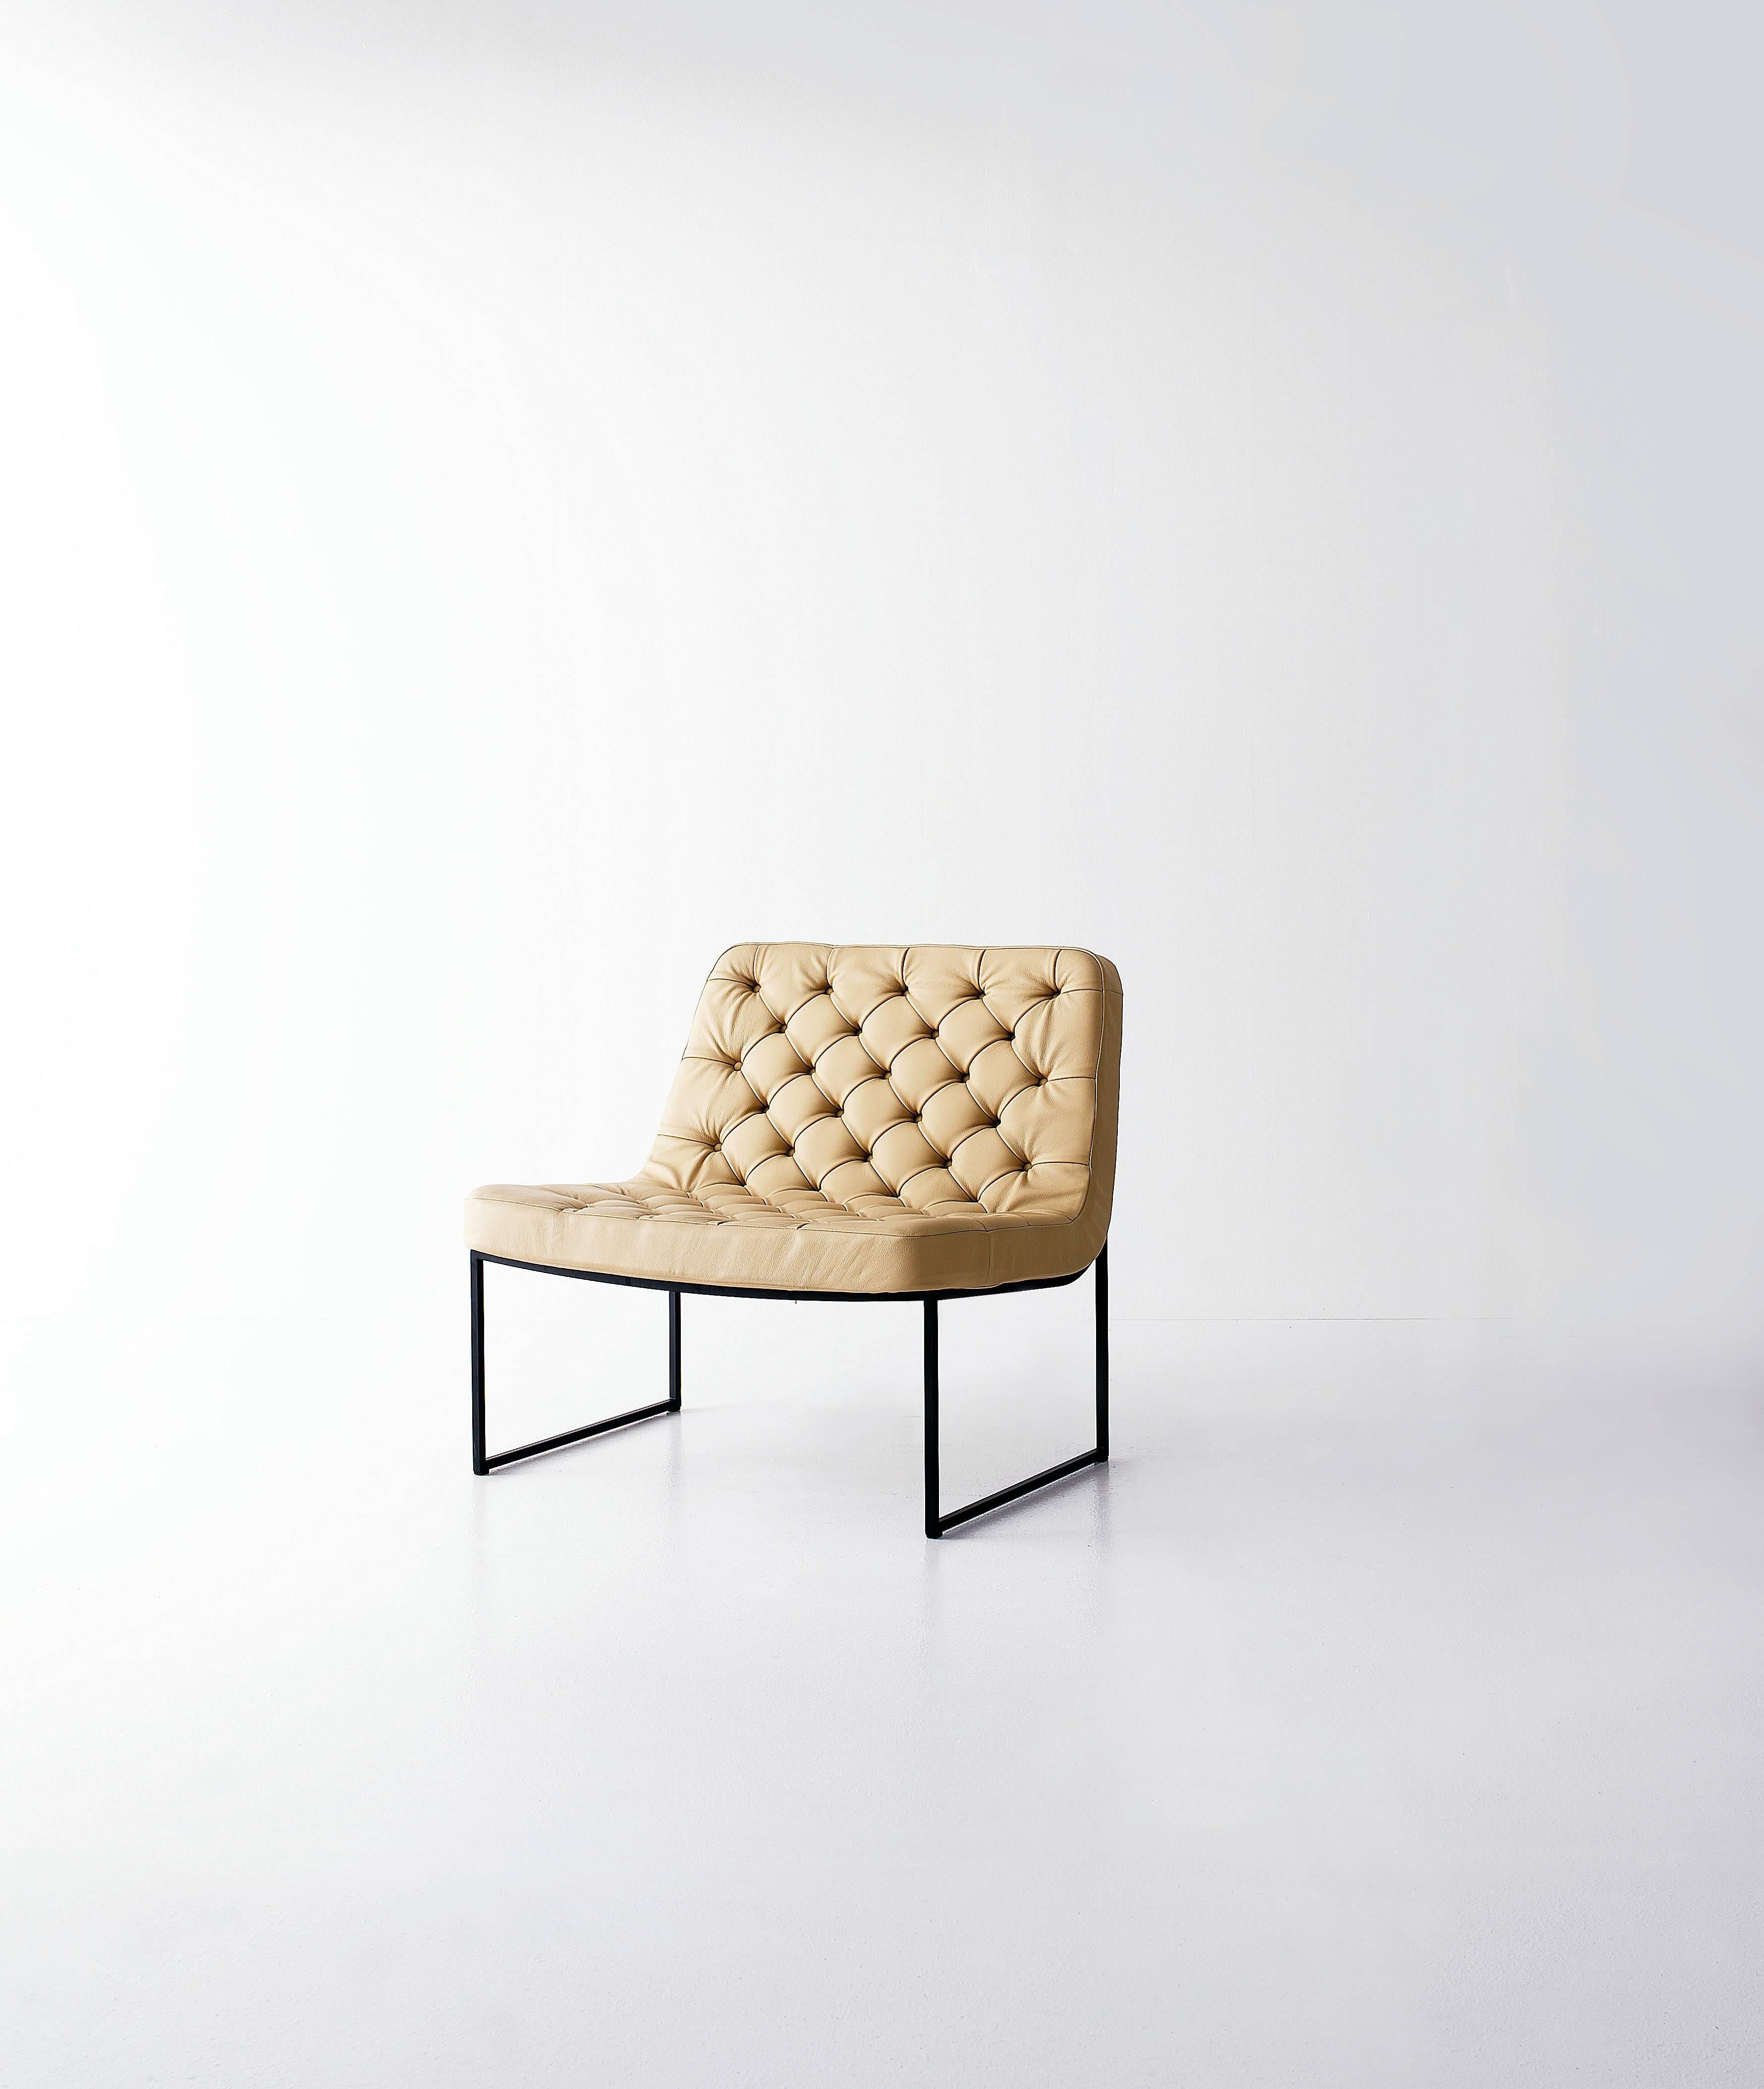 Small armchair with wide and comfortable seat, its look is made light through the frame in matt lacquered metal frame available in several colours. Available normal, quilted or with the elegant capitonné finish.

Pricing reflects chair upholstered